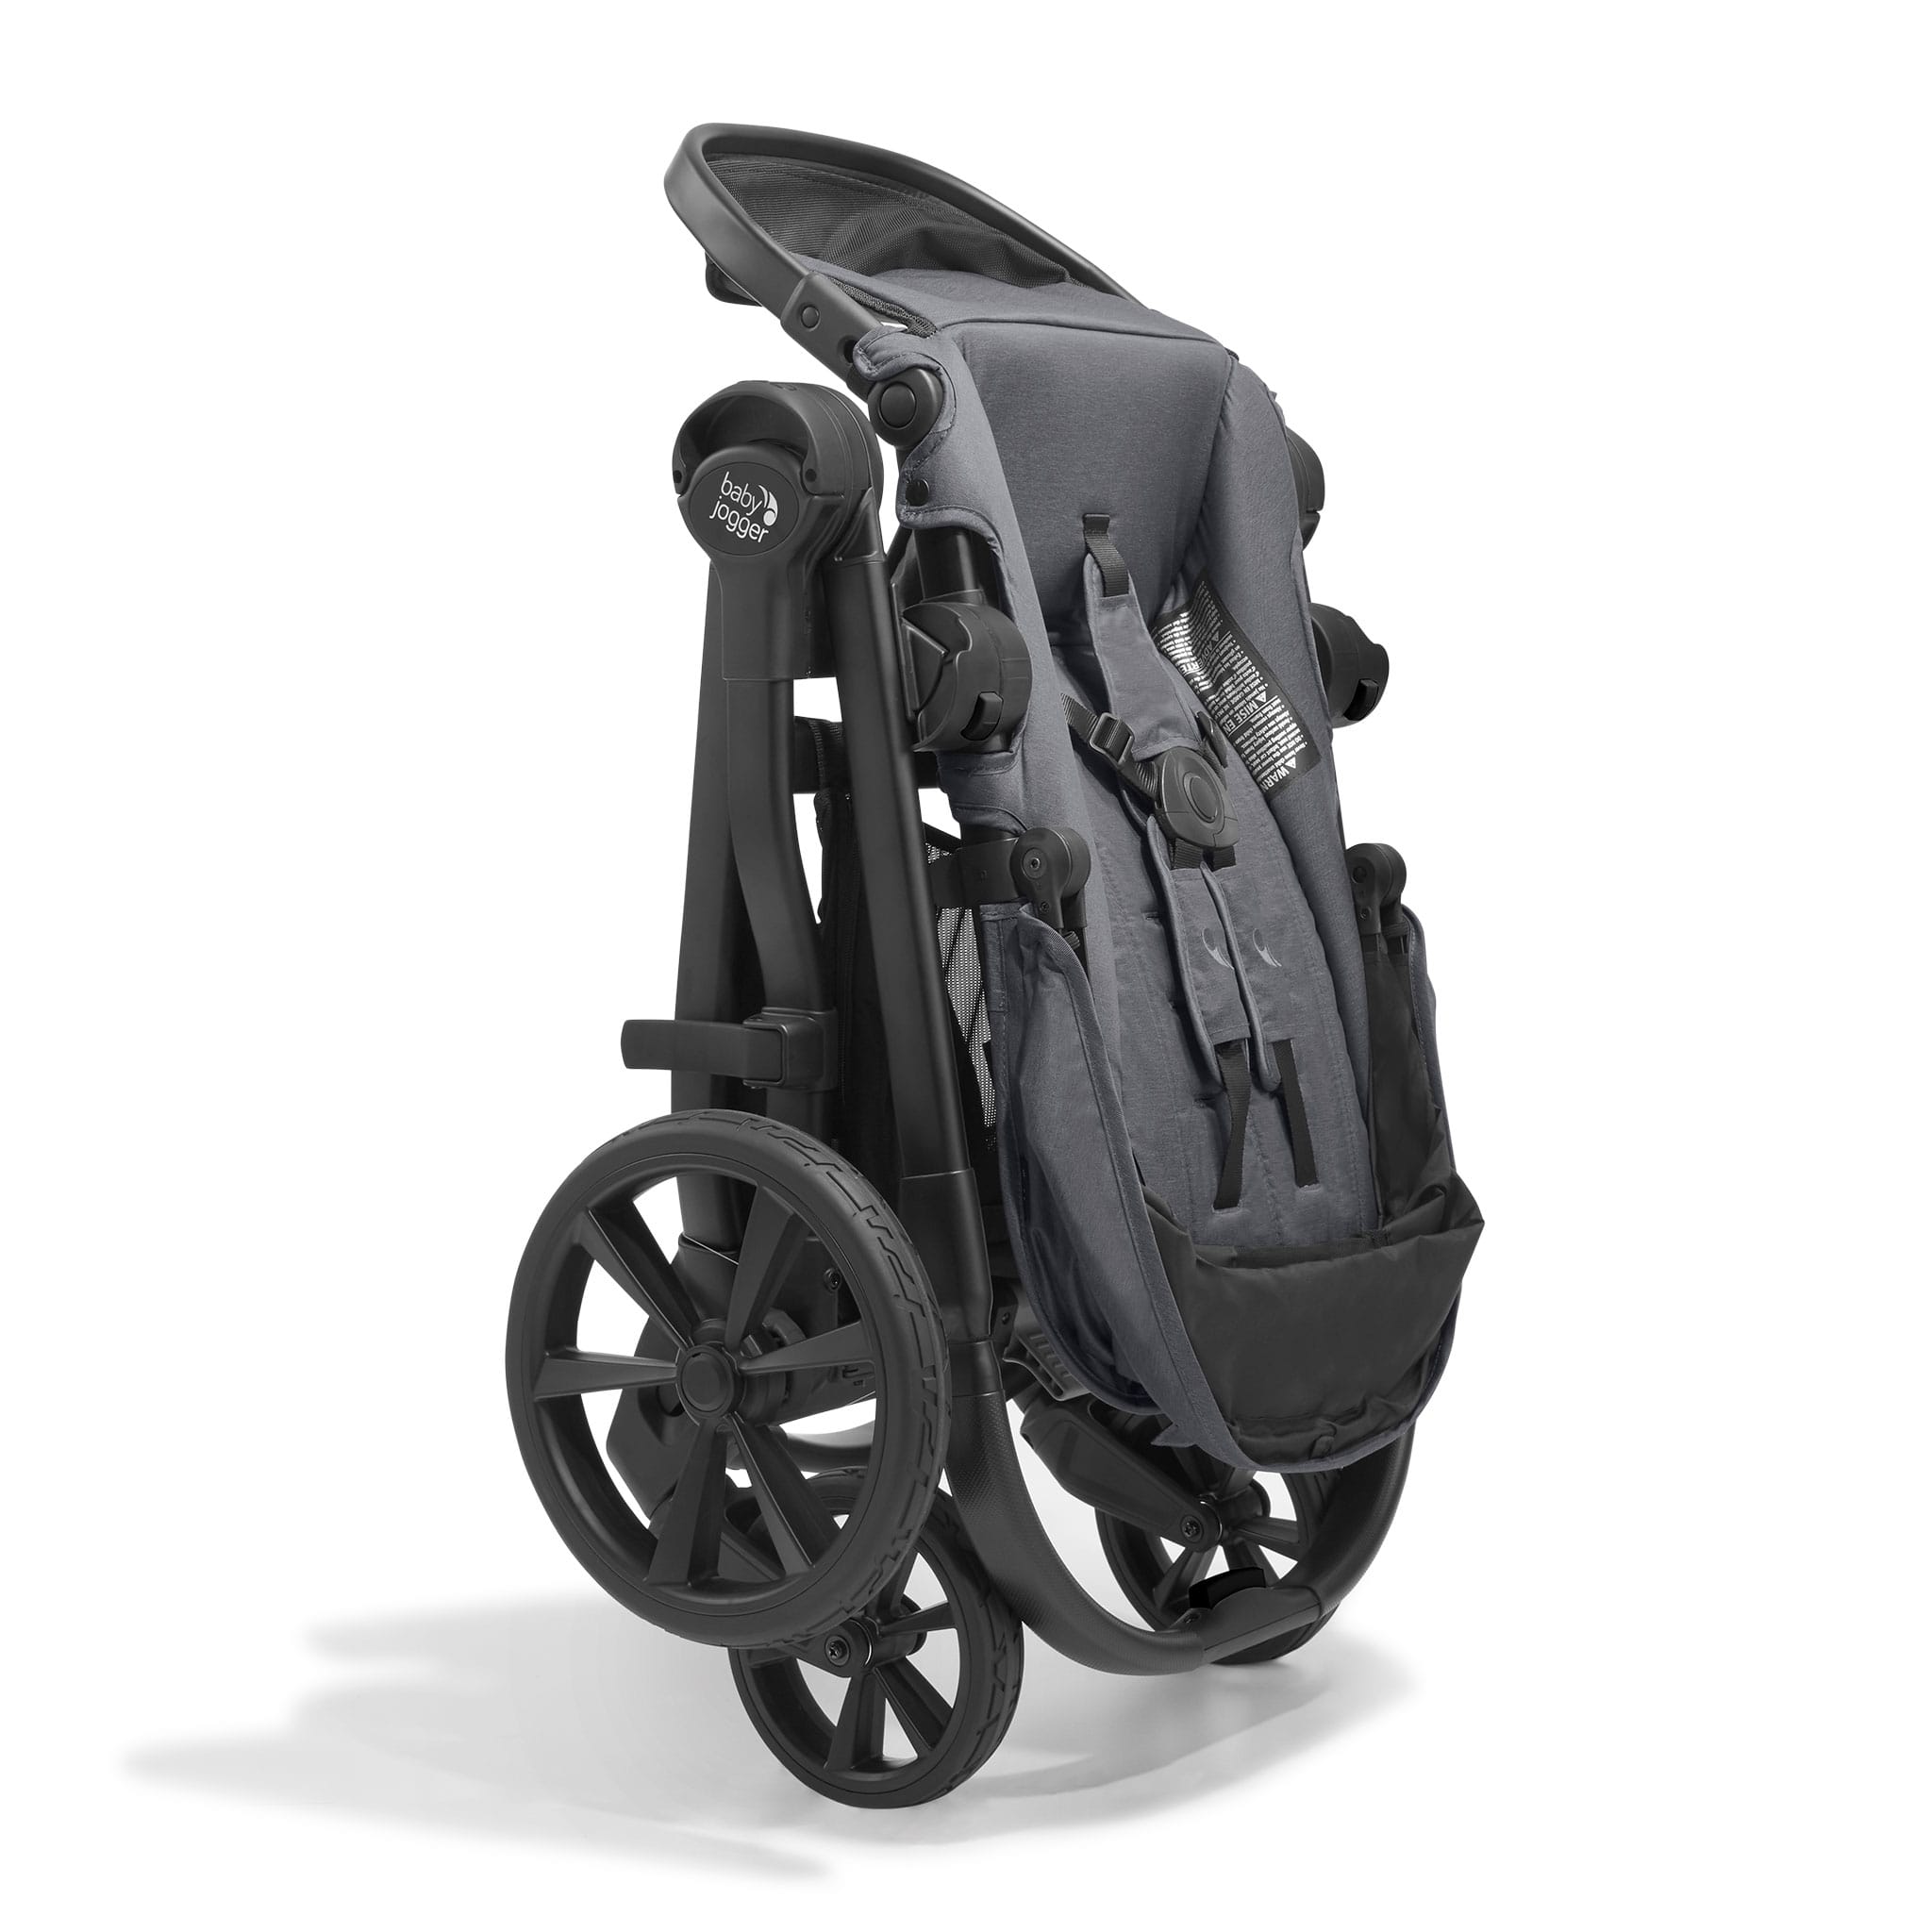 Baby Jogger: wózek spacerowy City Select 2